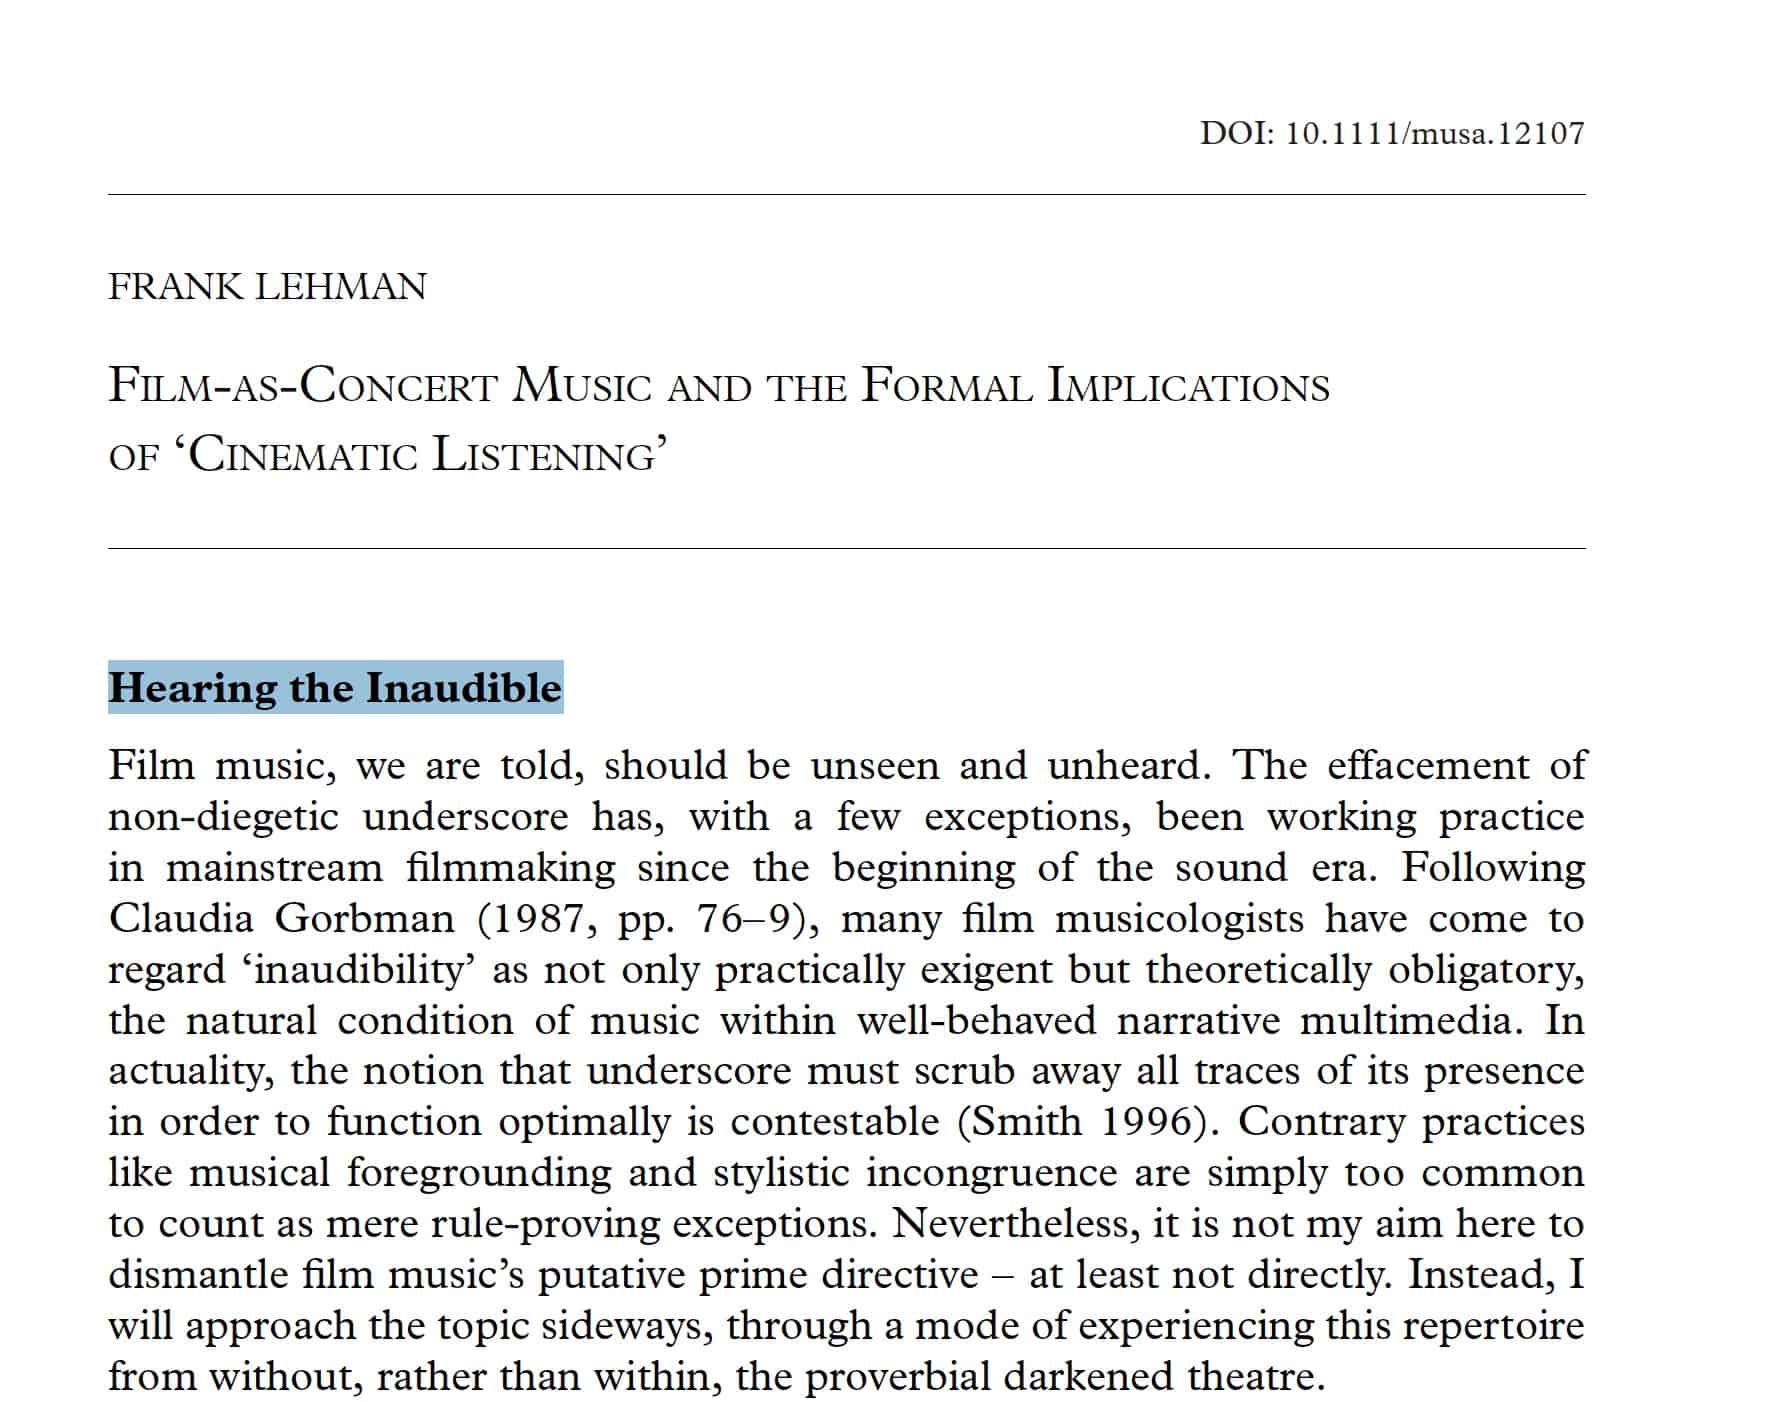 Film-as-Concert Music and the Formal Implications of ‘Cinematic Listening’ by Frank Lehman